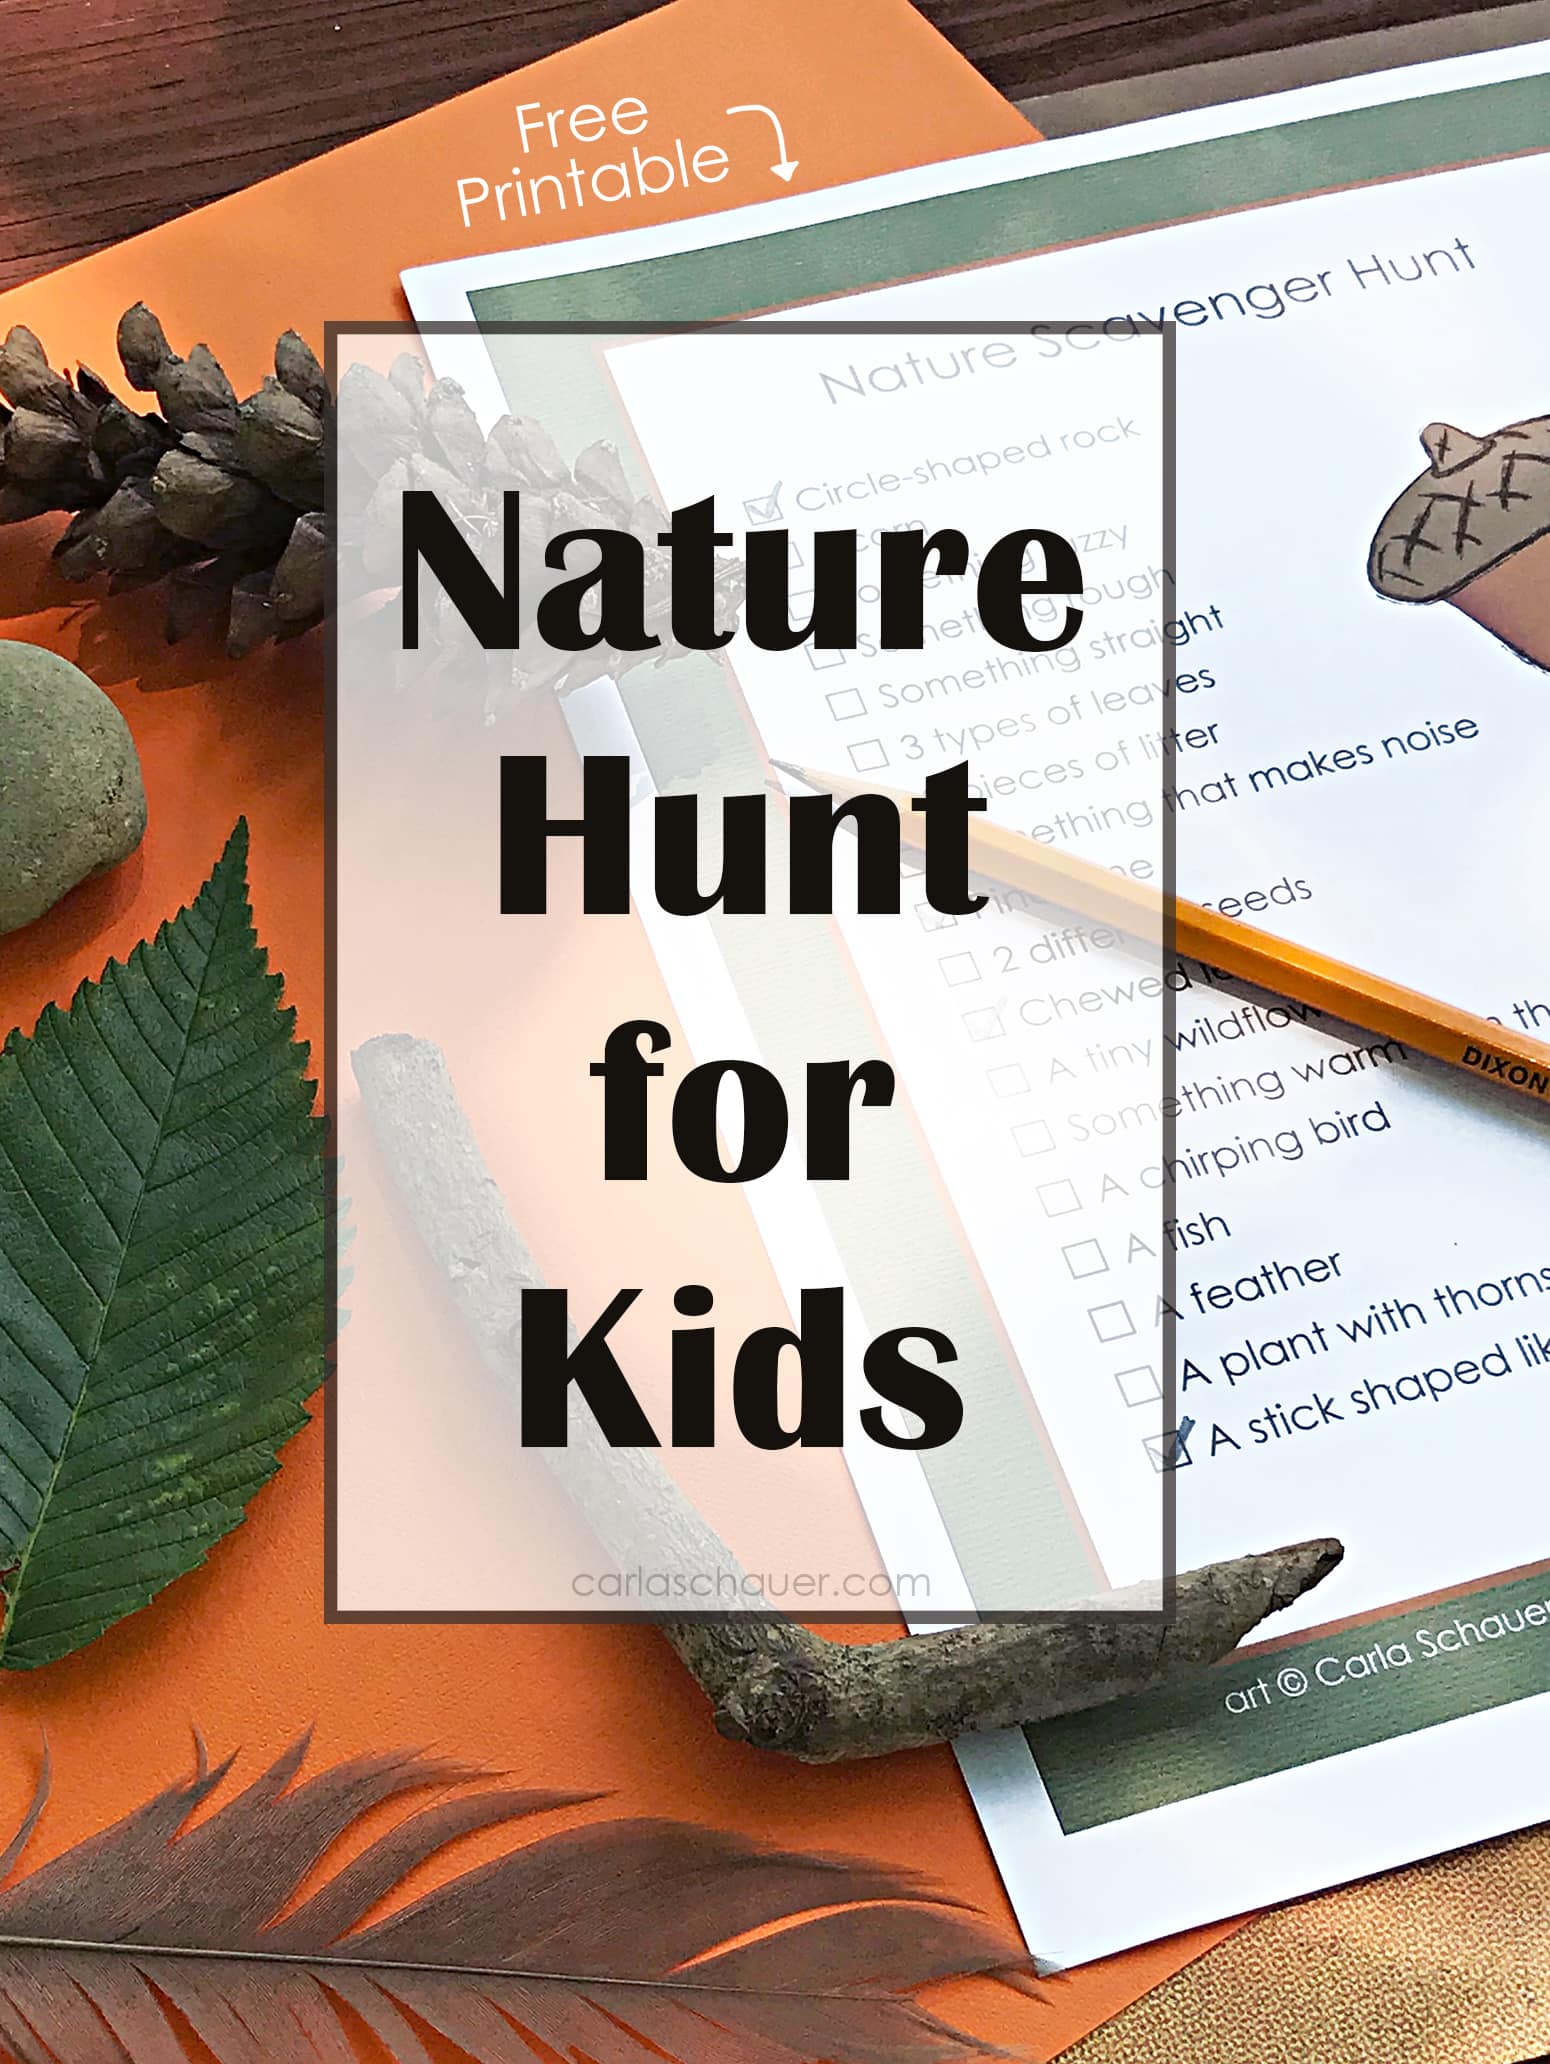 List of nature items next to pine cone, rock, and leaf, with orange paper background. Text overlay on white reads "Nature Hunt for Kids"